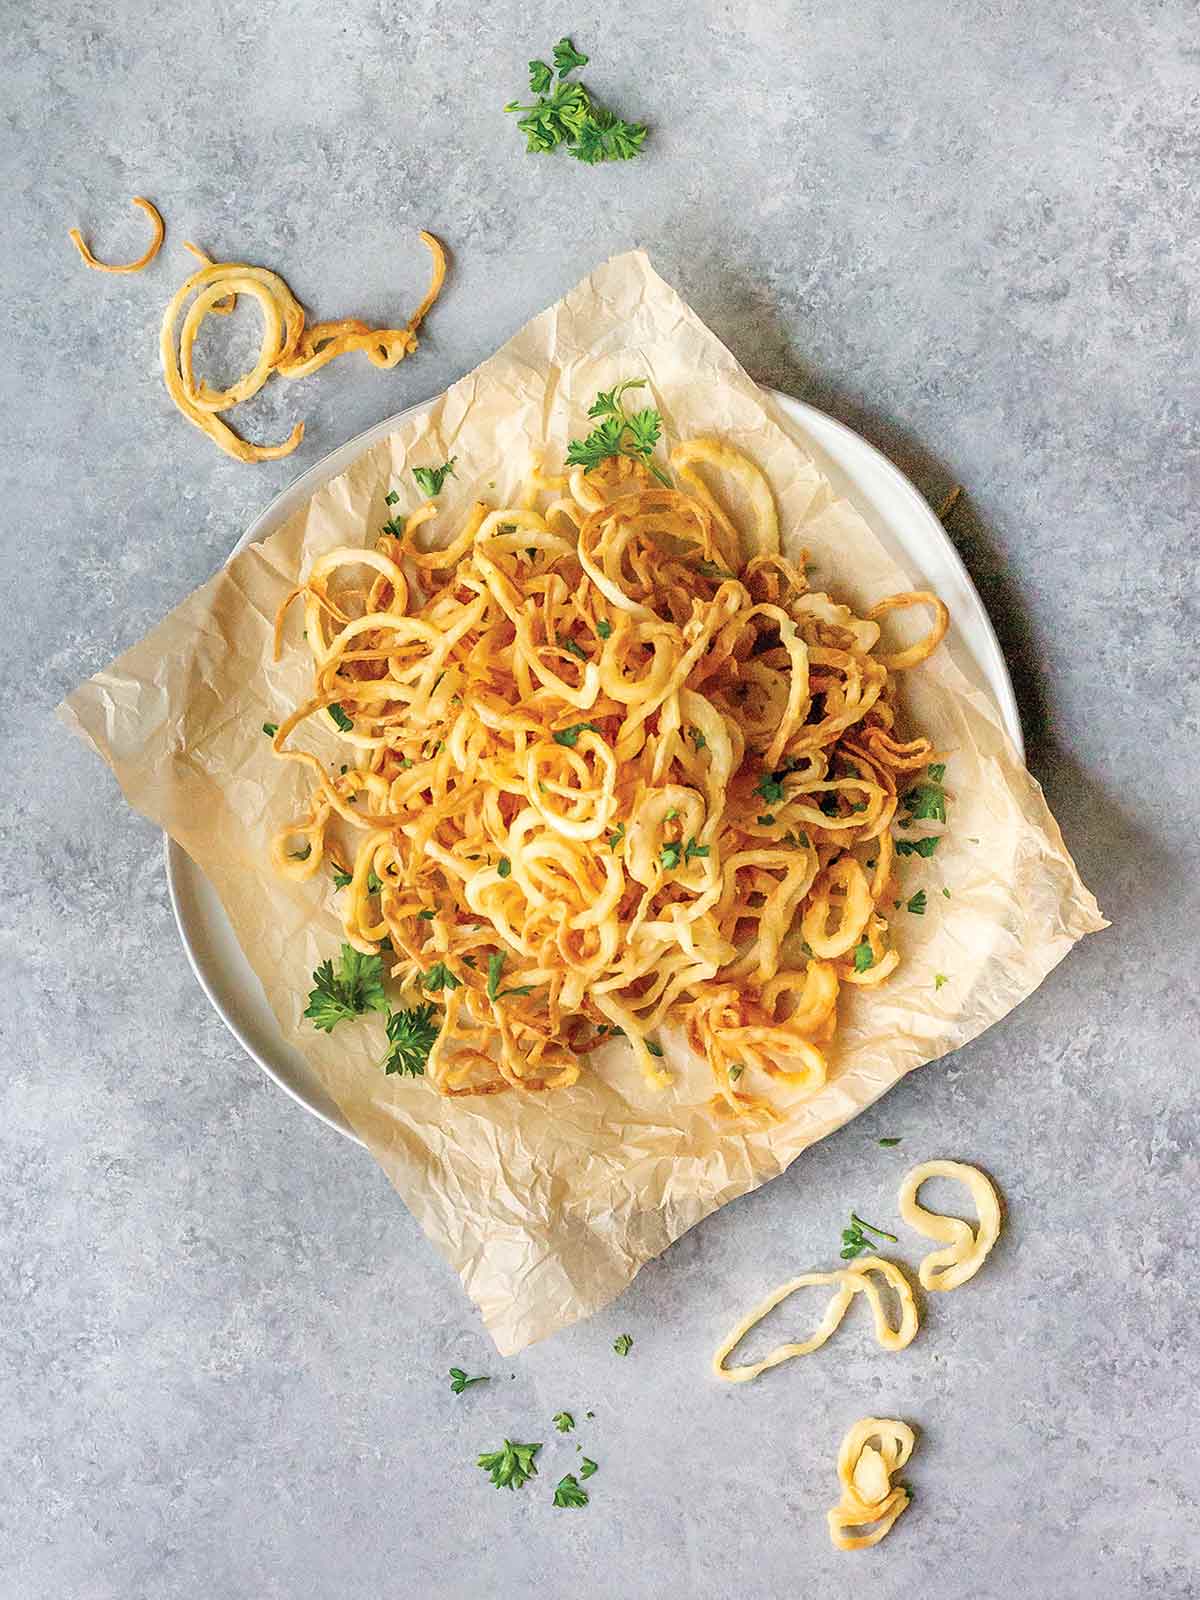 Dairy-free crispy onion strings on a sheet of parchment, on a white plate, garnished with parsley.